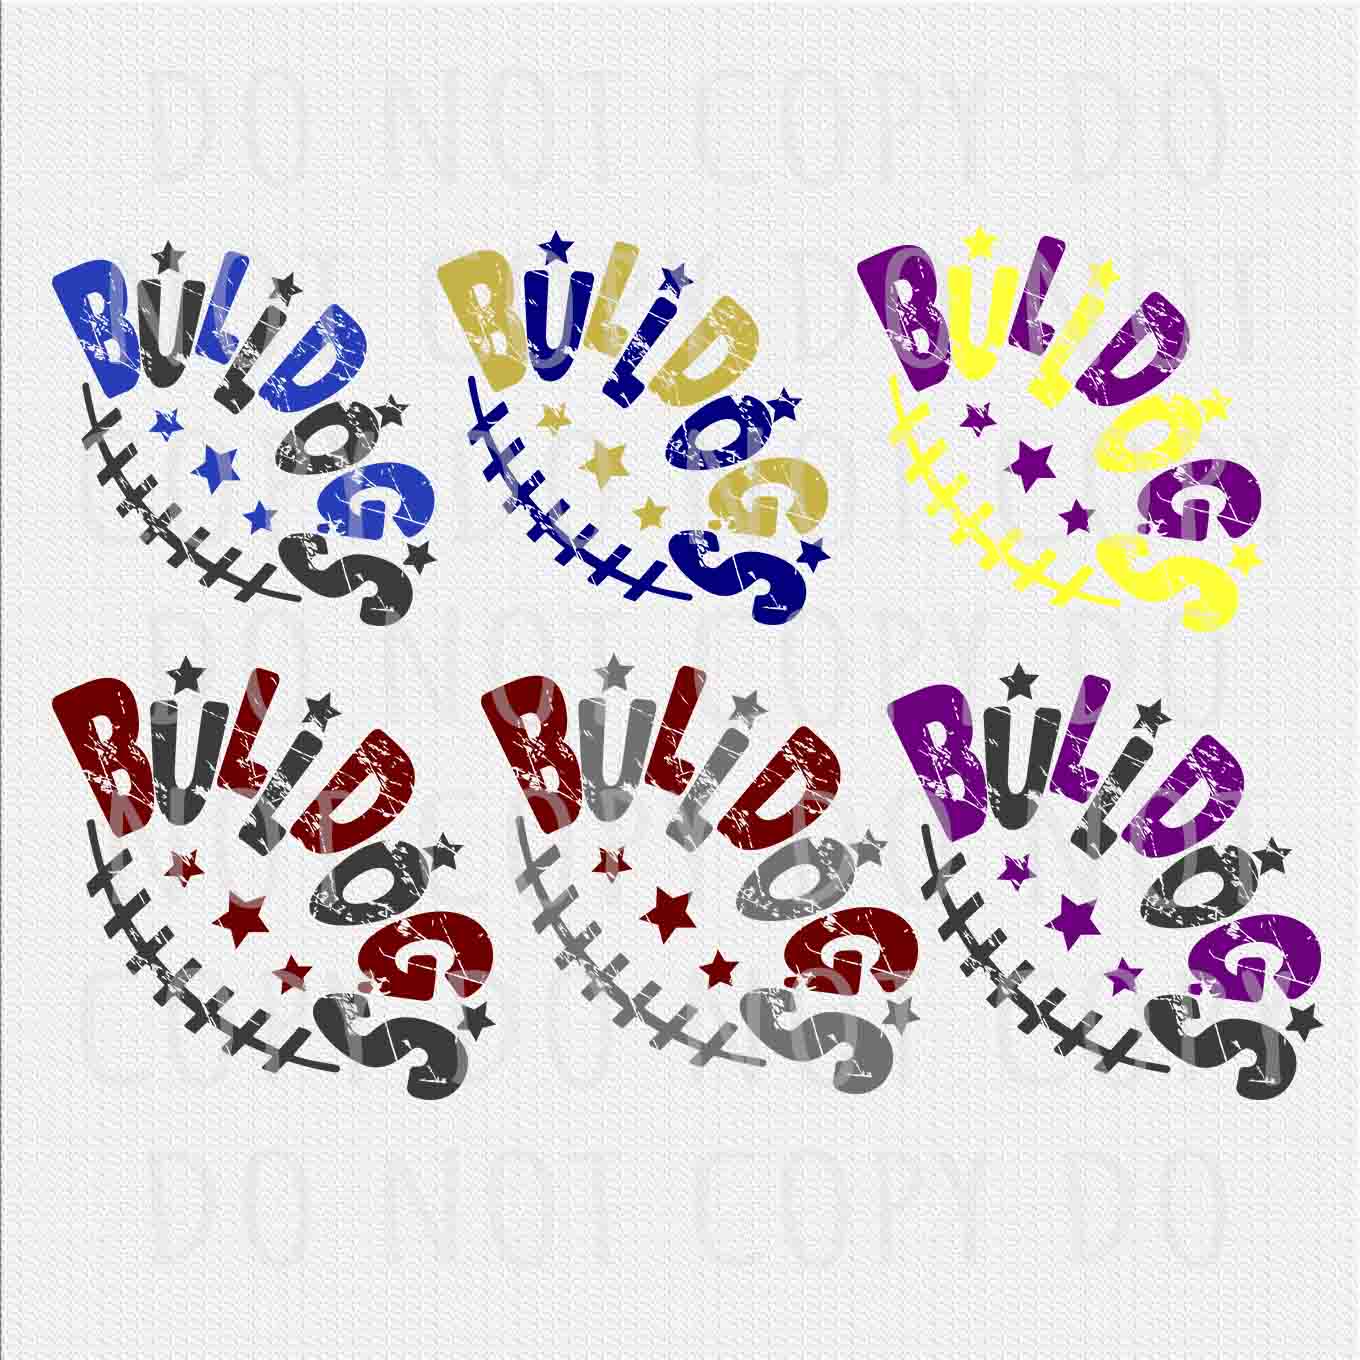 Bulldogs team png (+ 5 design FREE), Retro Bulldogs Royal Blue and Gray Vintage Letters football design png, Sublimation design png